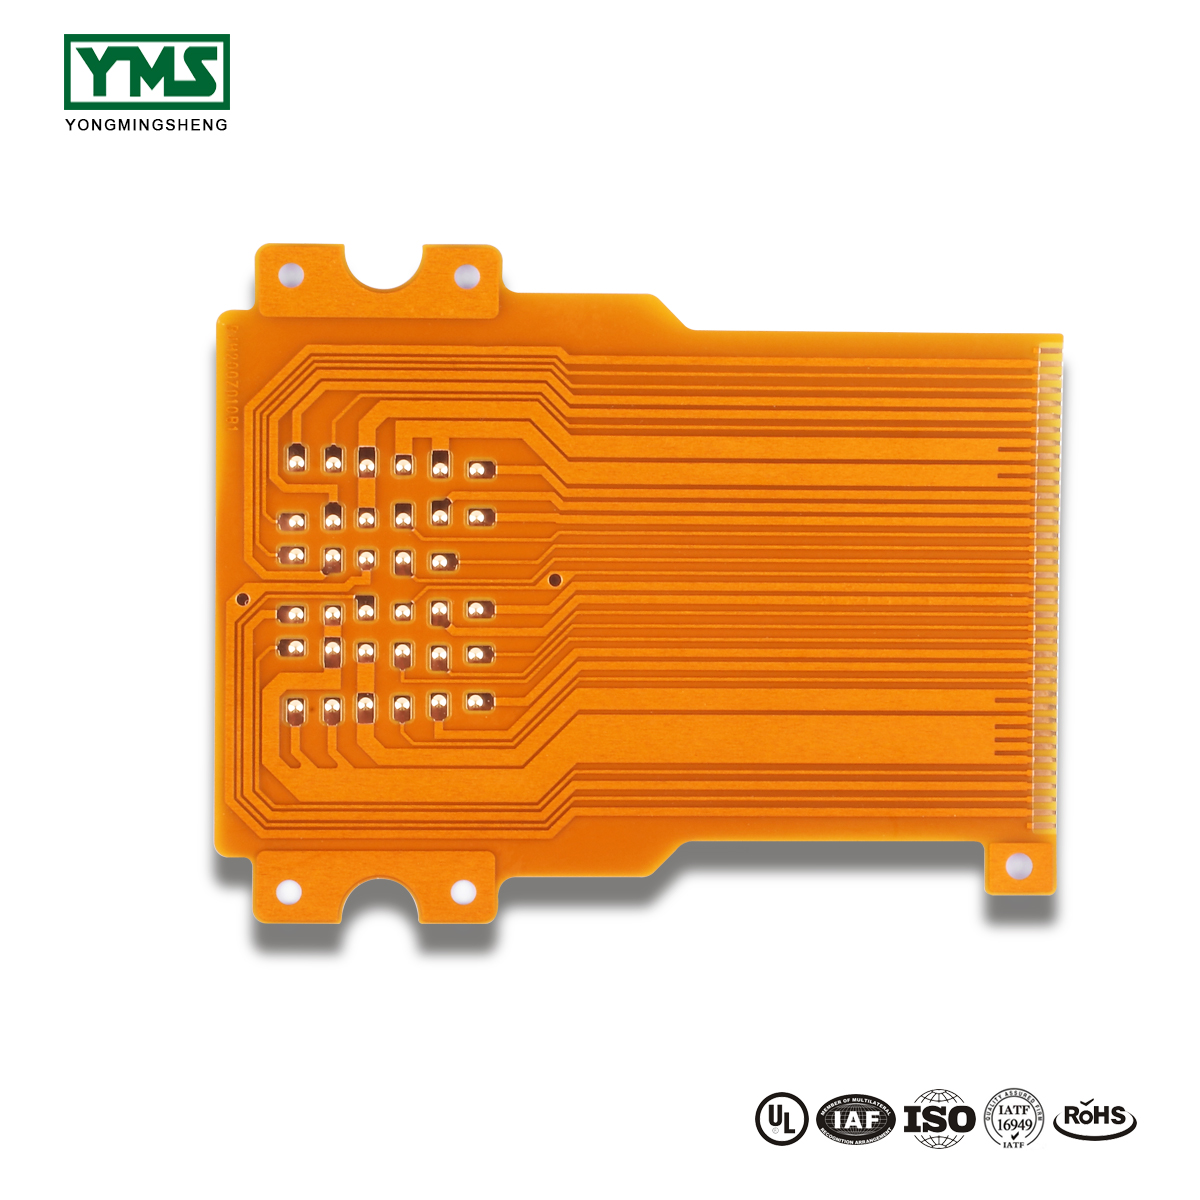 Good User Reputation for Simple Printed Circuit Board - 1Layer Raised Point flexible Board | YMSPCB – Yongmingsheng